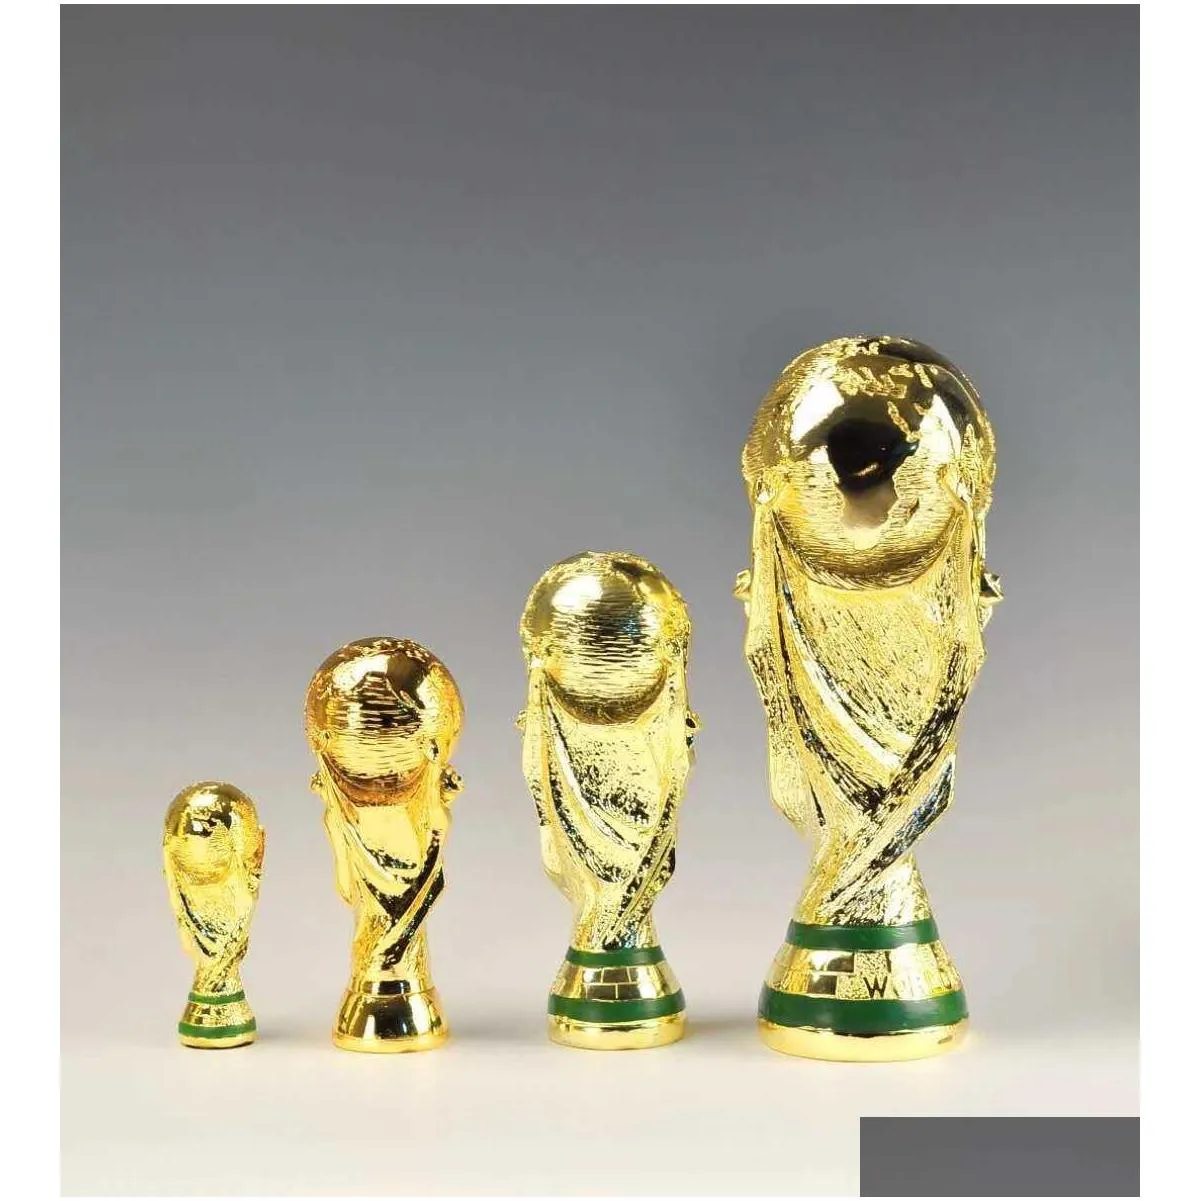 european golden resin football trophy gift world soccer trophies mascot home office decoration crafts